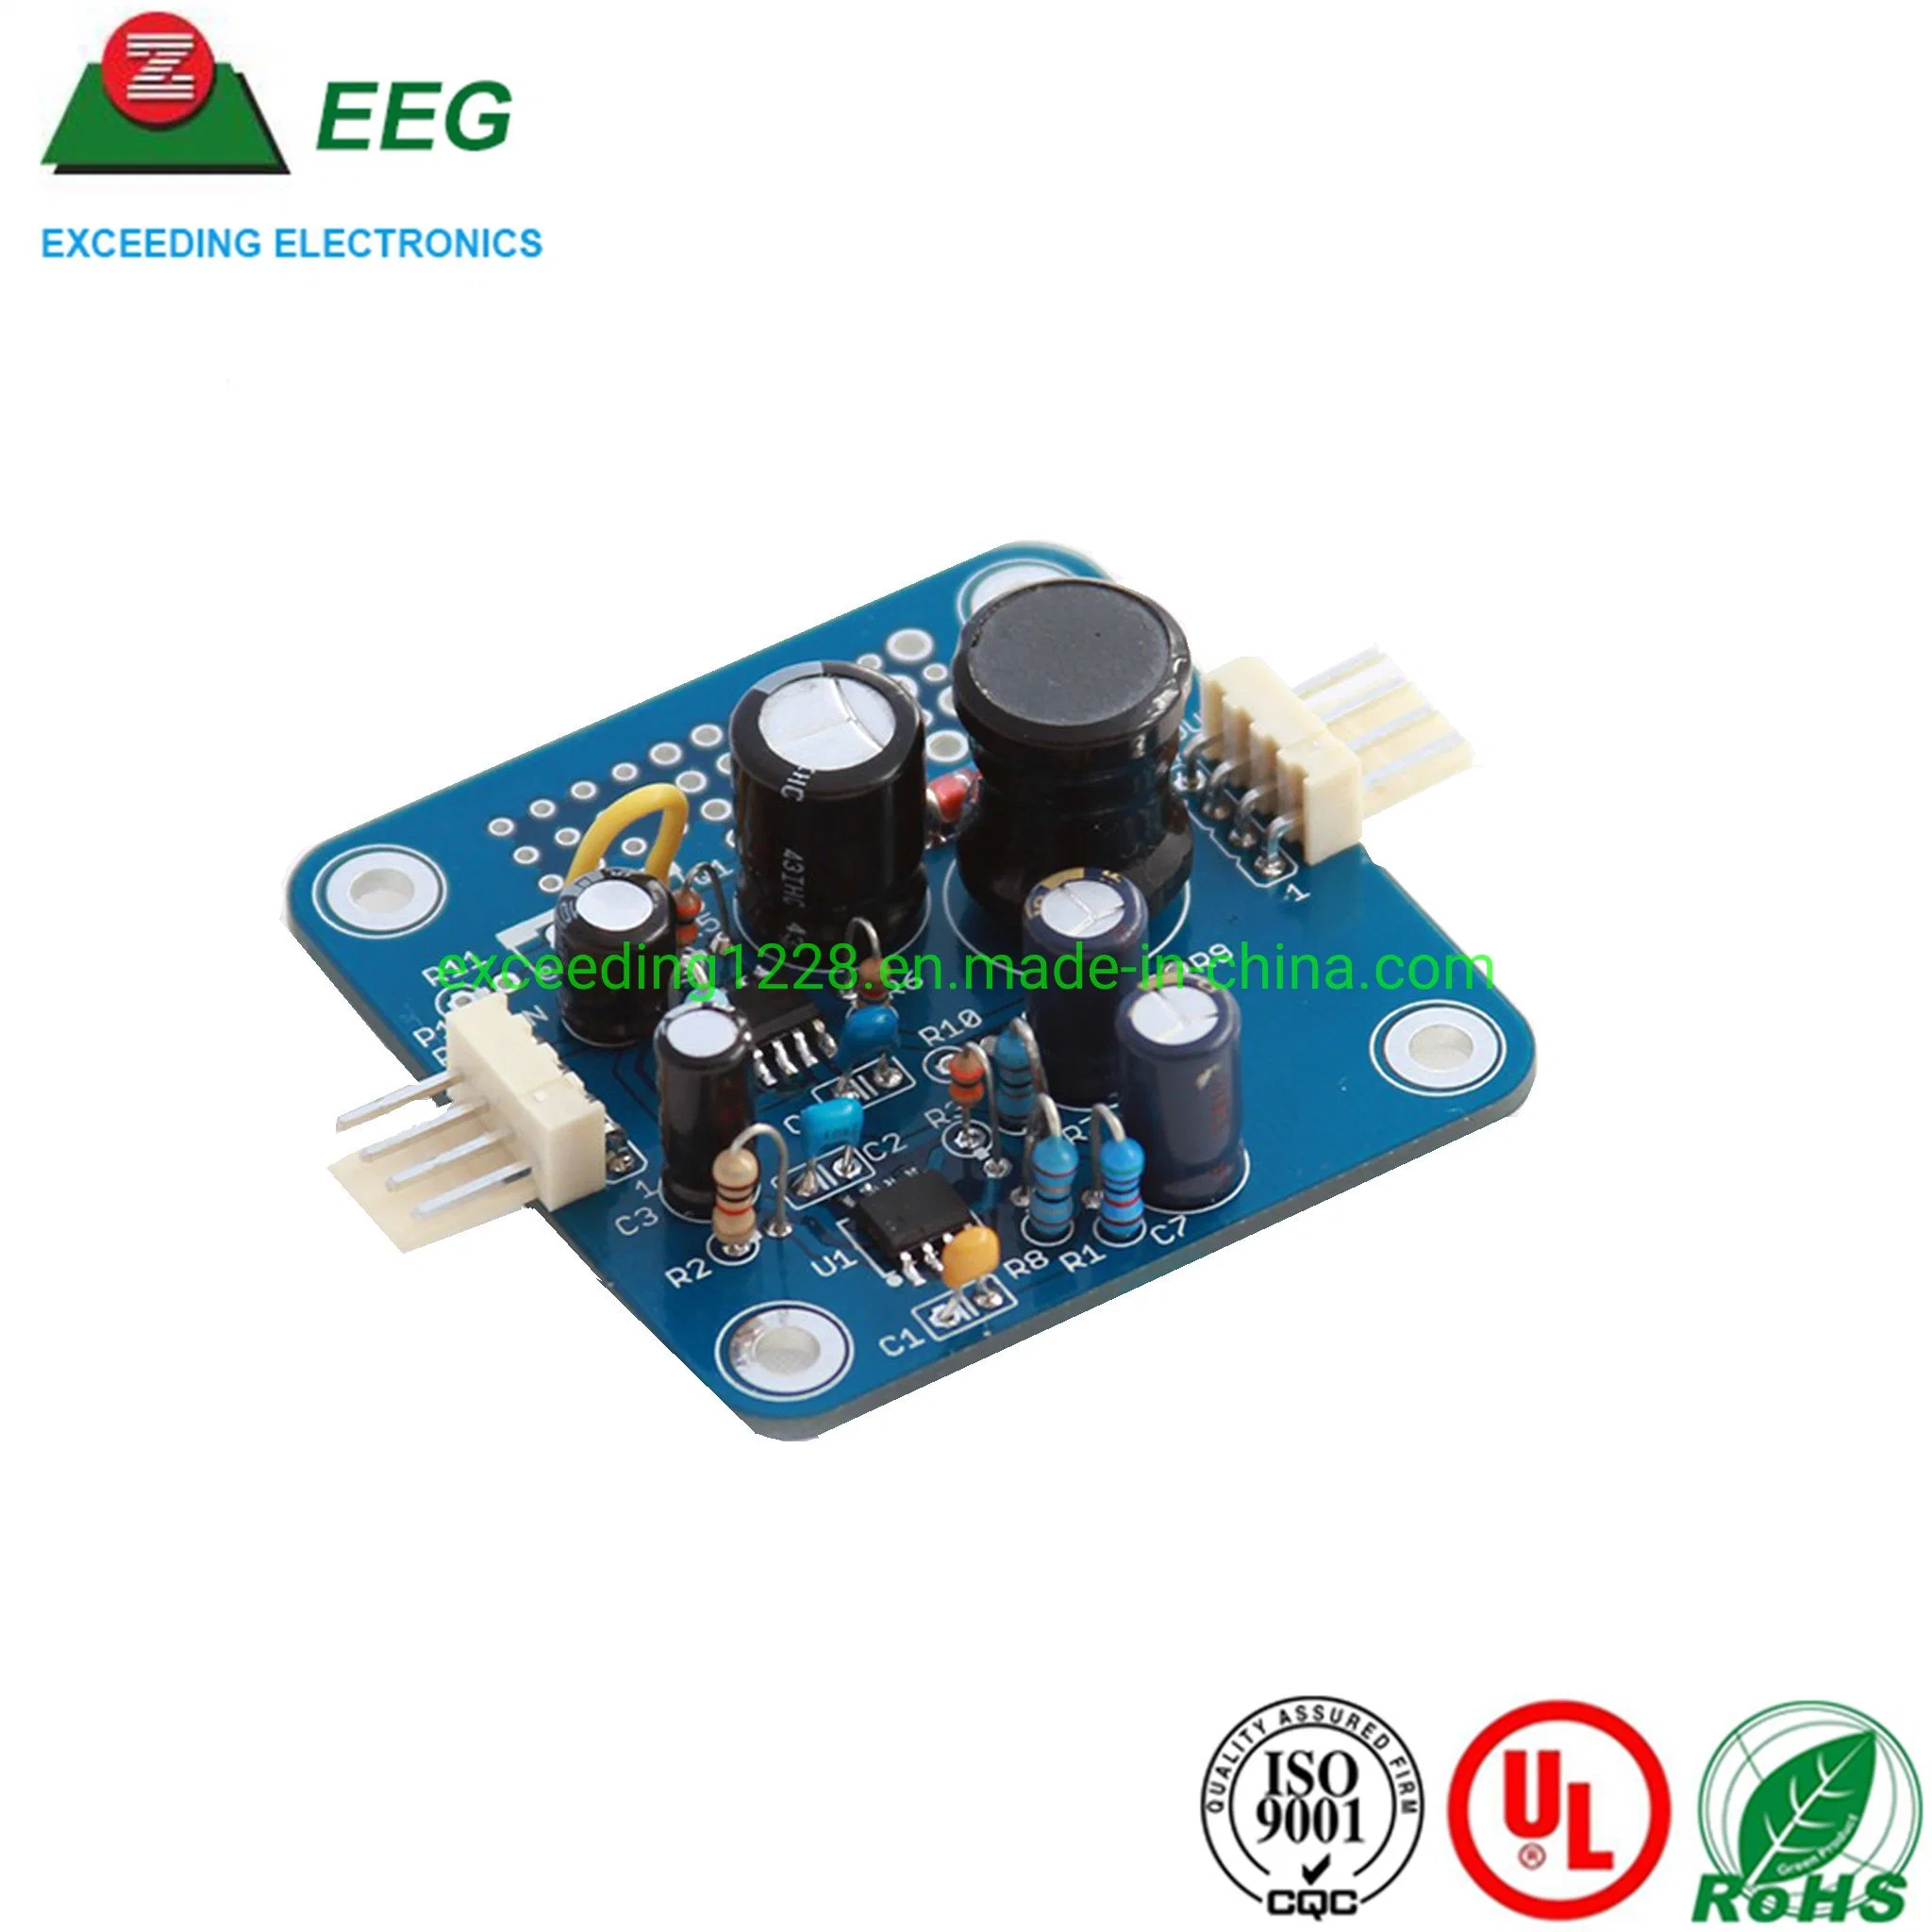 One-Stop Electronics Components Souring Service PCB Fabrication Assembly PCBA Manufacturing